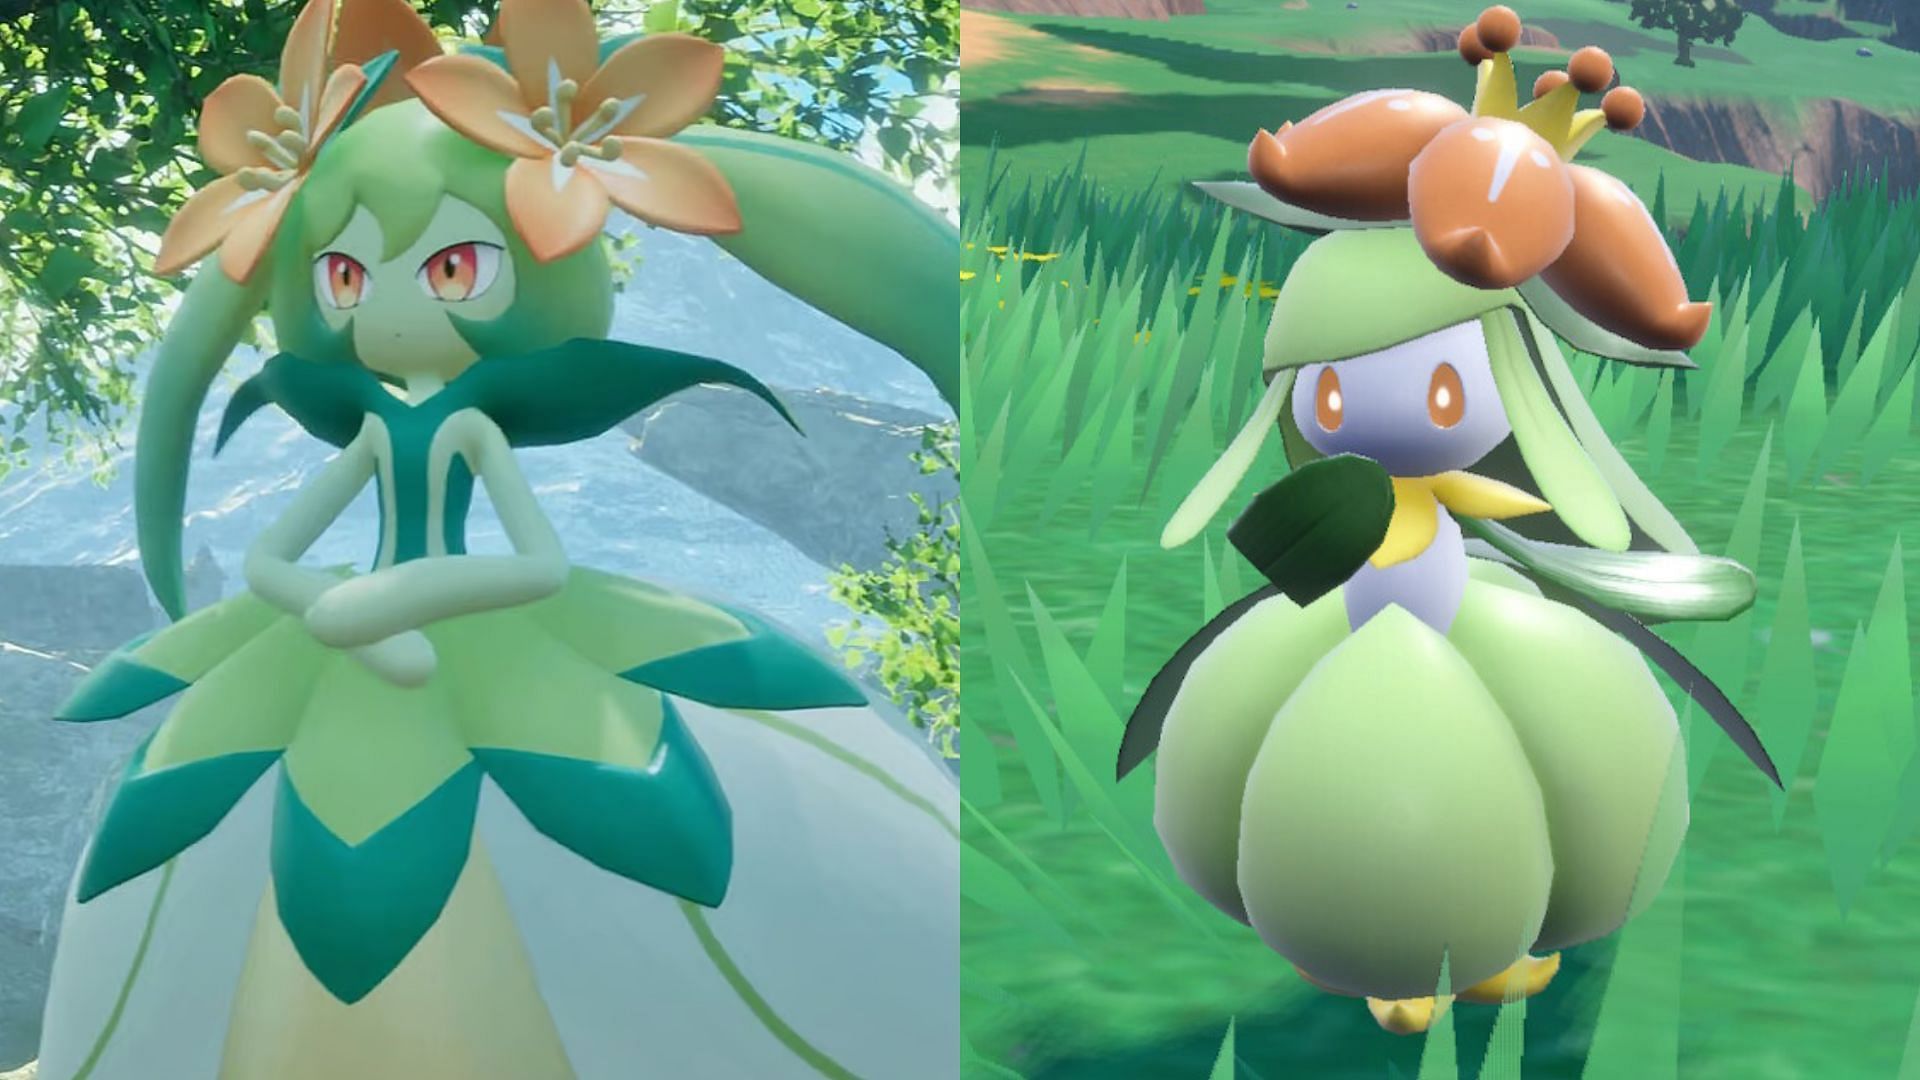 Lyleen's Palworld Pal design resembles Lilligant to a great extent (Image via Pocketpair/The Pokemon Company)